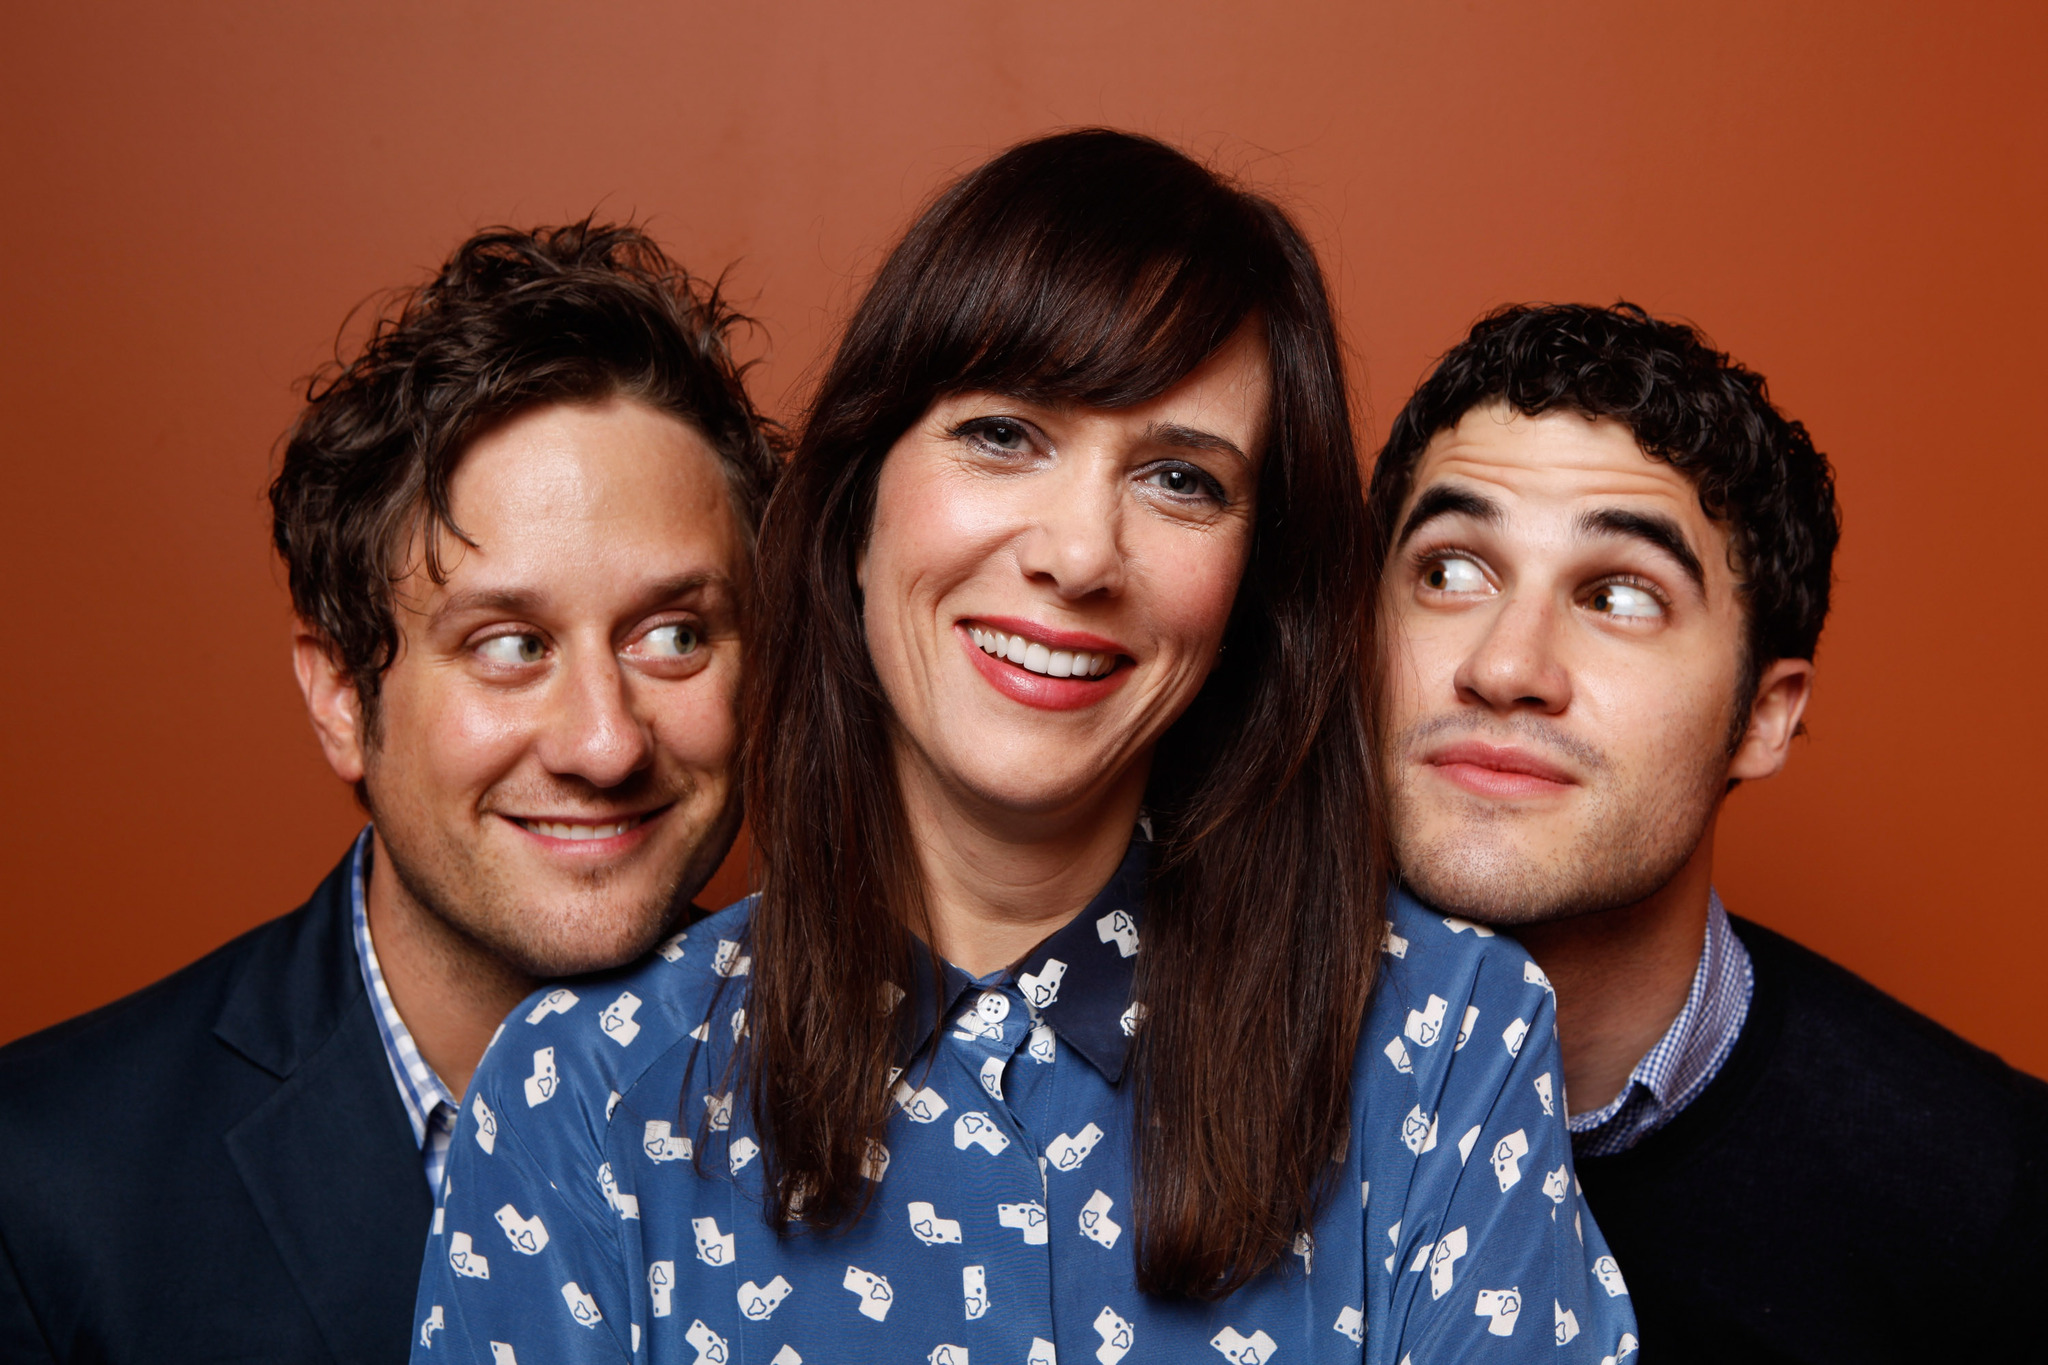 Christopher Fitzgerald, Kristen Wiig and Darren Criss at event of Girl Most Likely (2012)